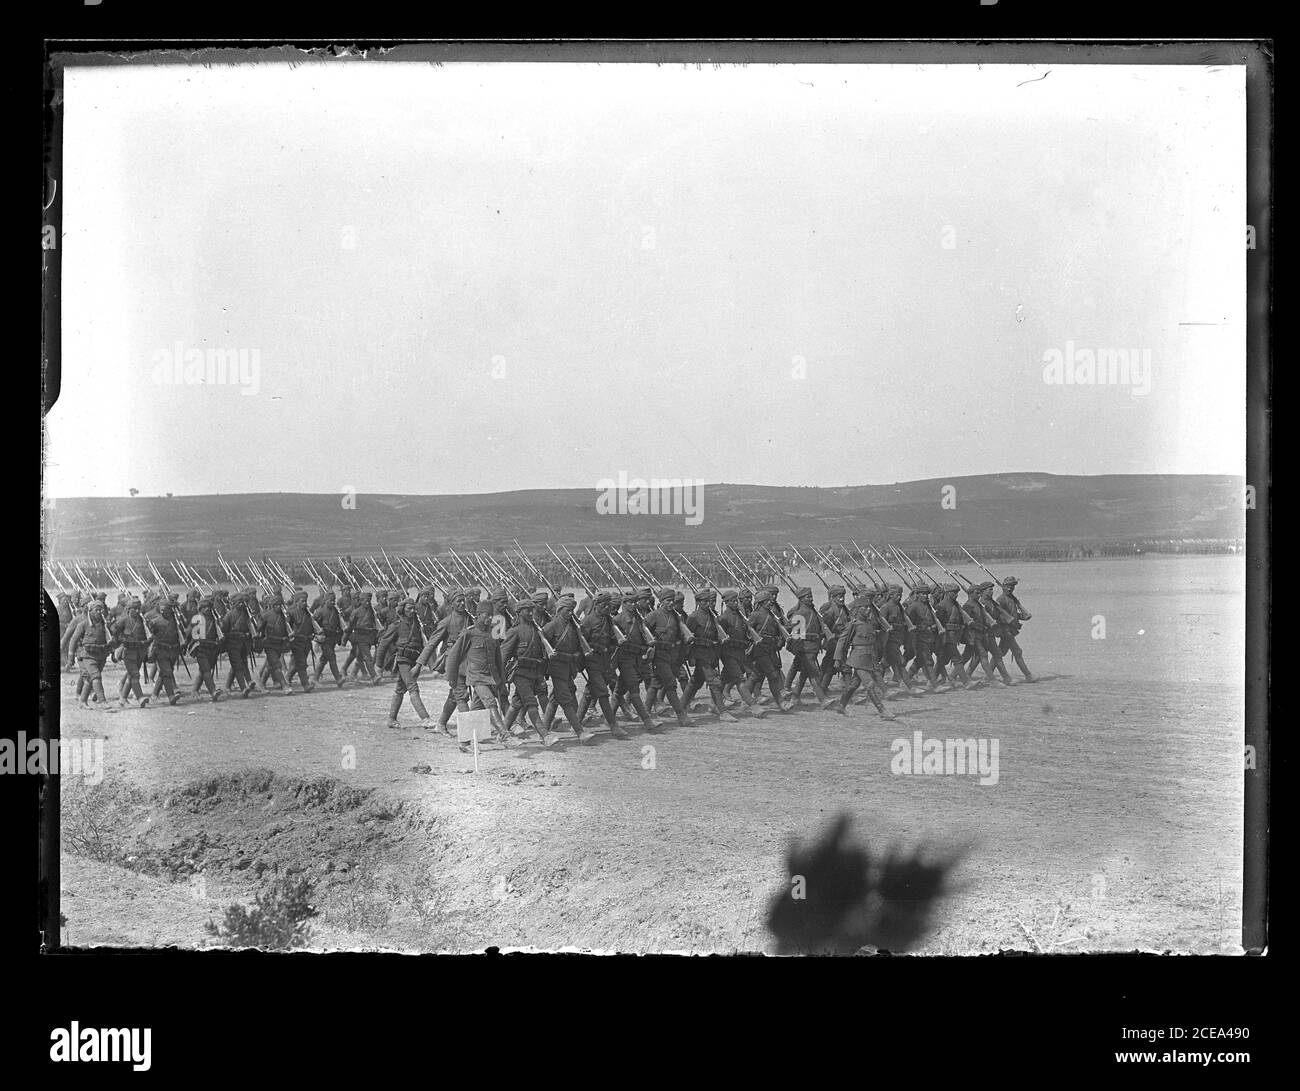 Ottoman infantry in formation parading on a field. The soldiers are marching with rifles shouldered. The weapons are Mauser model M1903 with bayonets fixed. The officers wear wool caps and leather boots, the soldiers headwraps and puttees. Photograph on dry glass plate from the Herry W. Schaefer collection, around 1913. Stock Photo